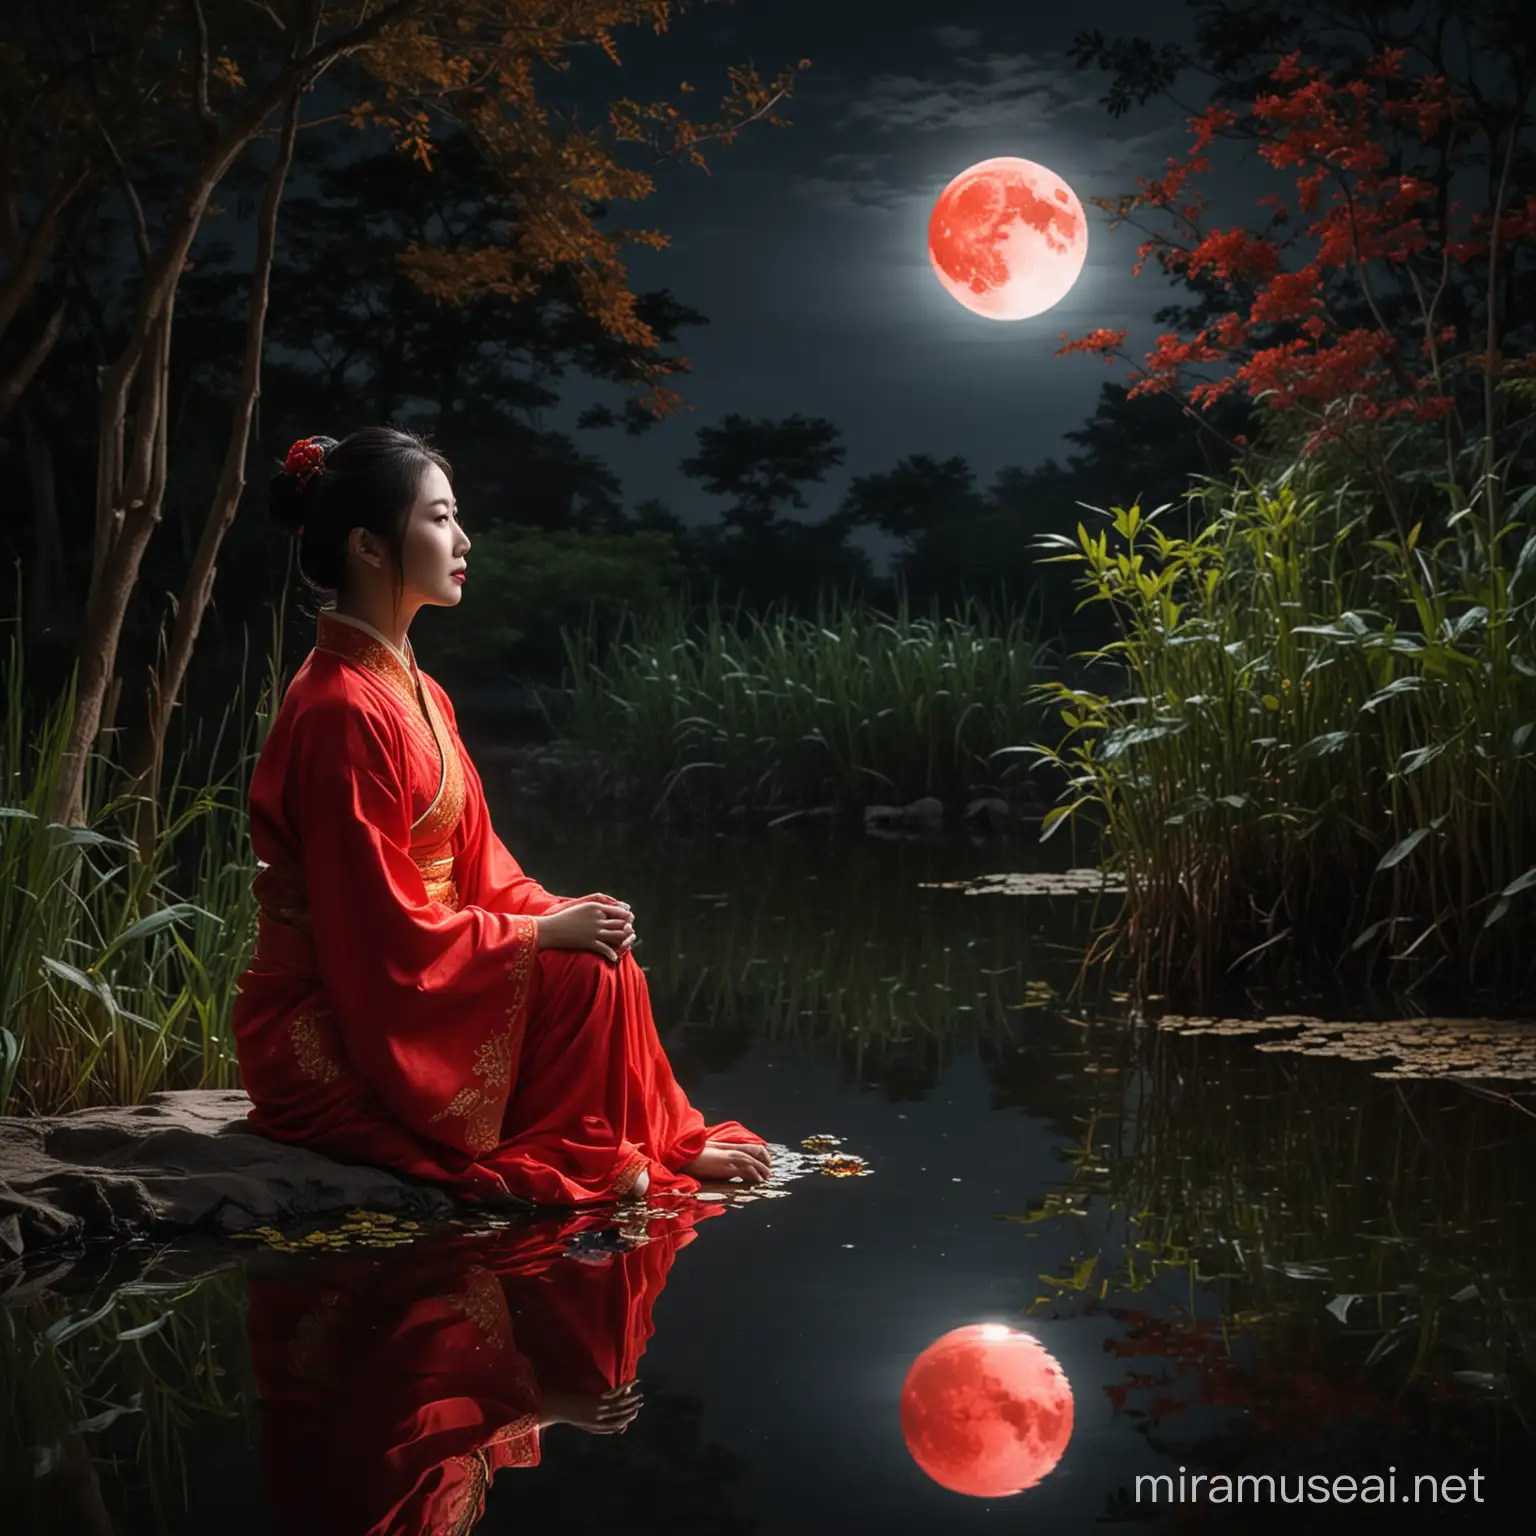 Serene Chinese Woman in Red by Moonlit Pond